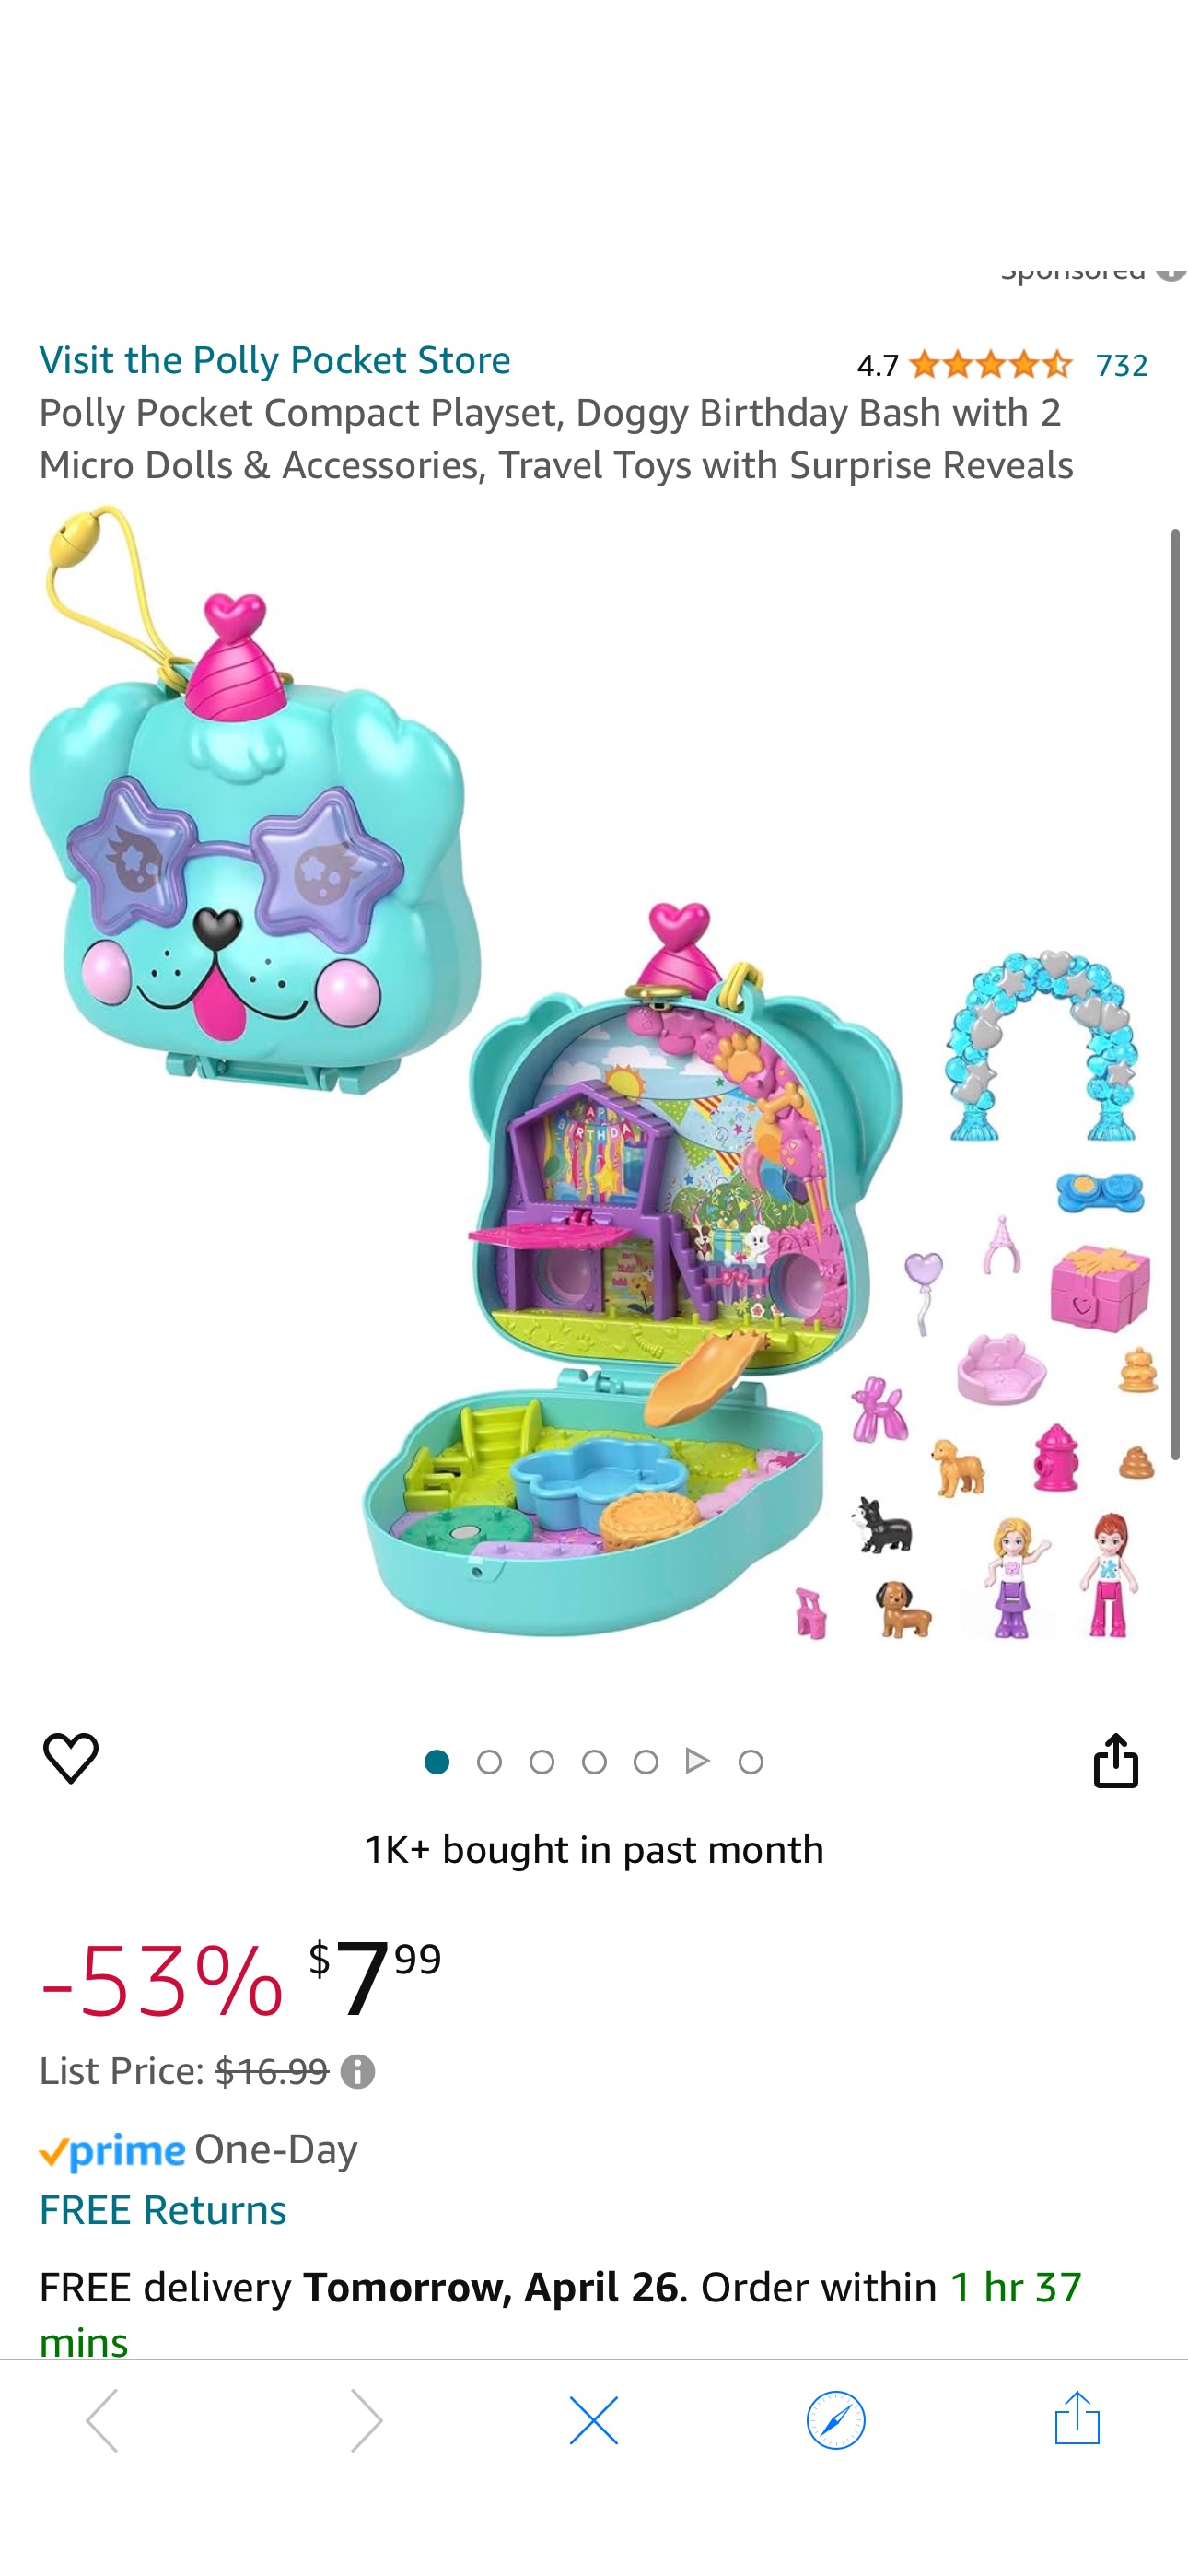 Amazon.com: Polly Pocket Compact Playset, Doggy Birthday Bash with 2 Micro Dolls & Accessories, Travel Toys with Surprise Reveals : Toys & Games